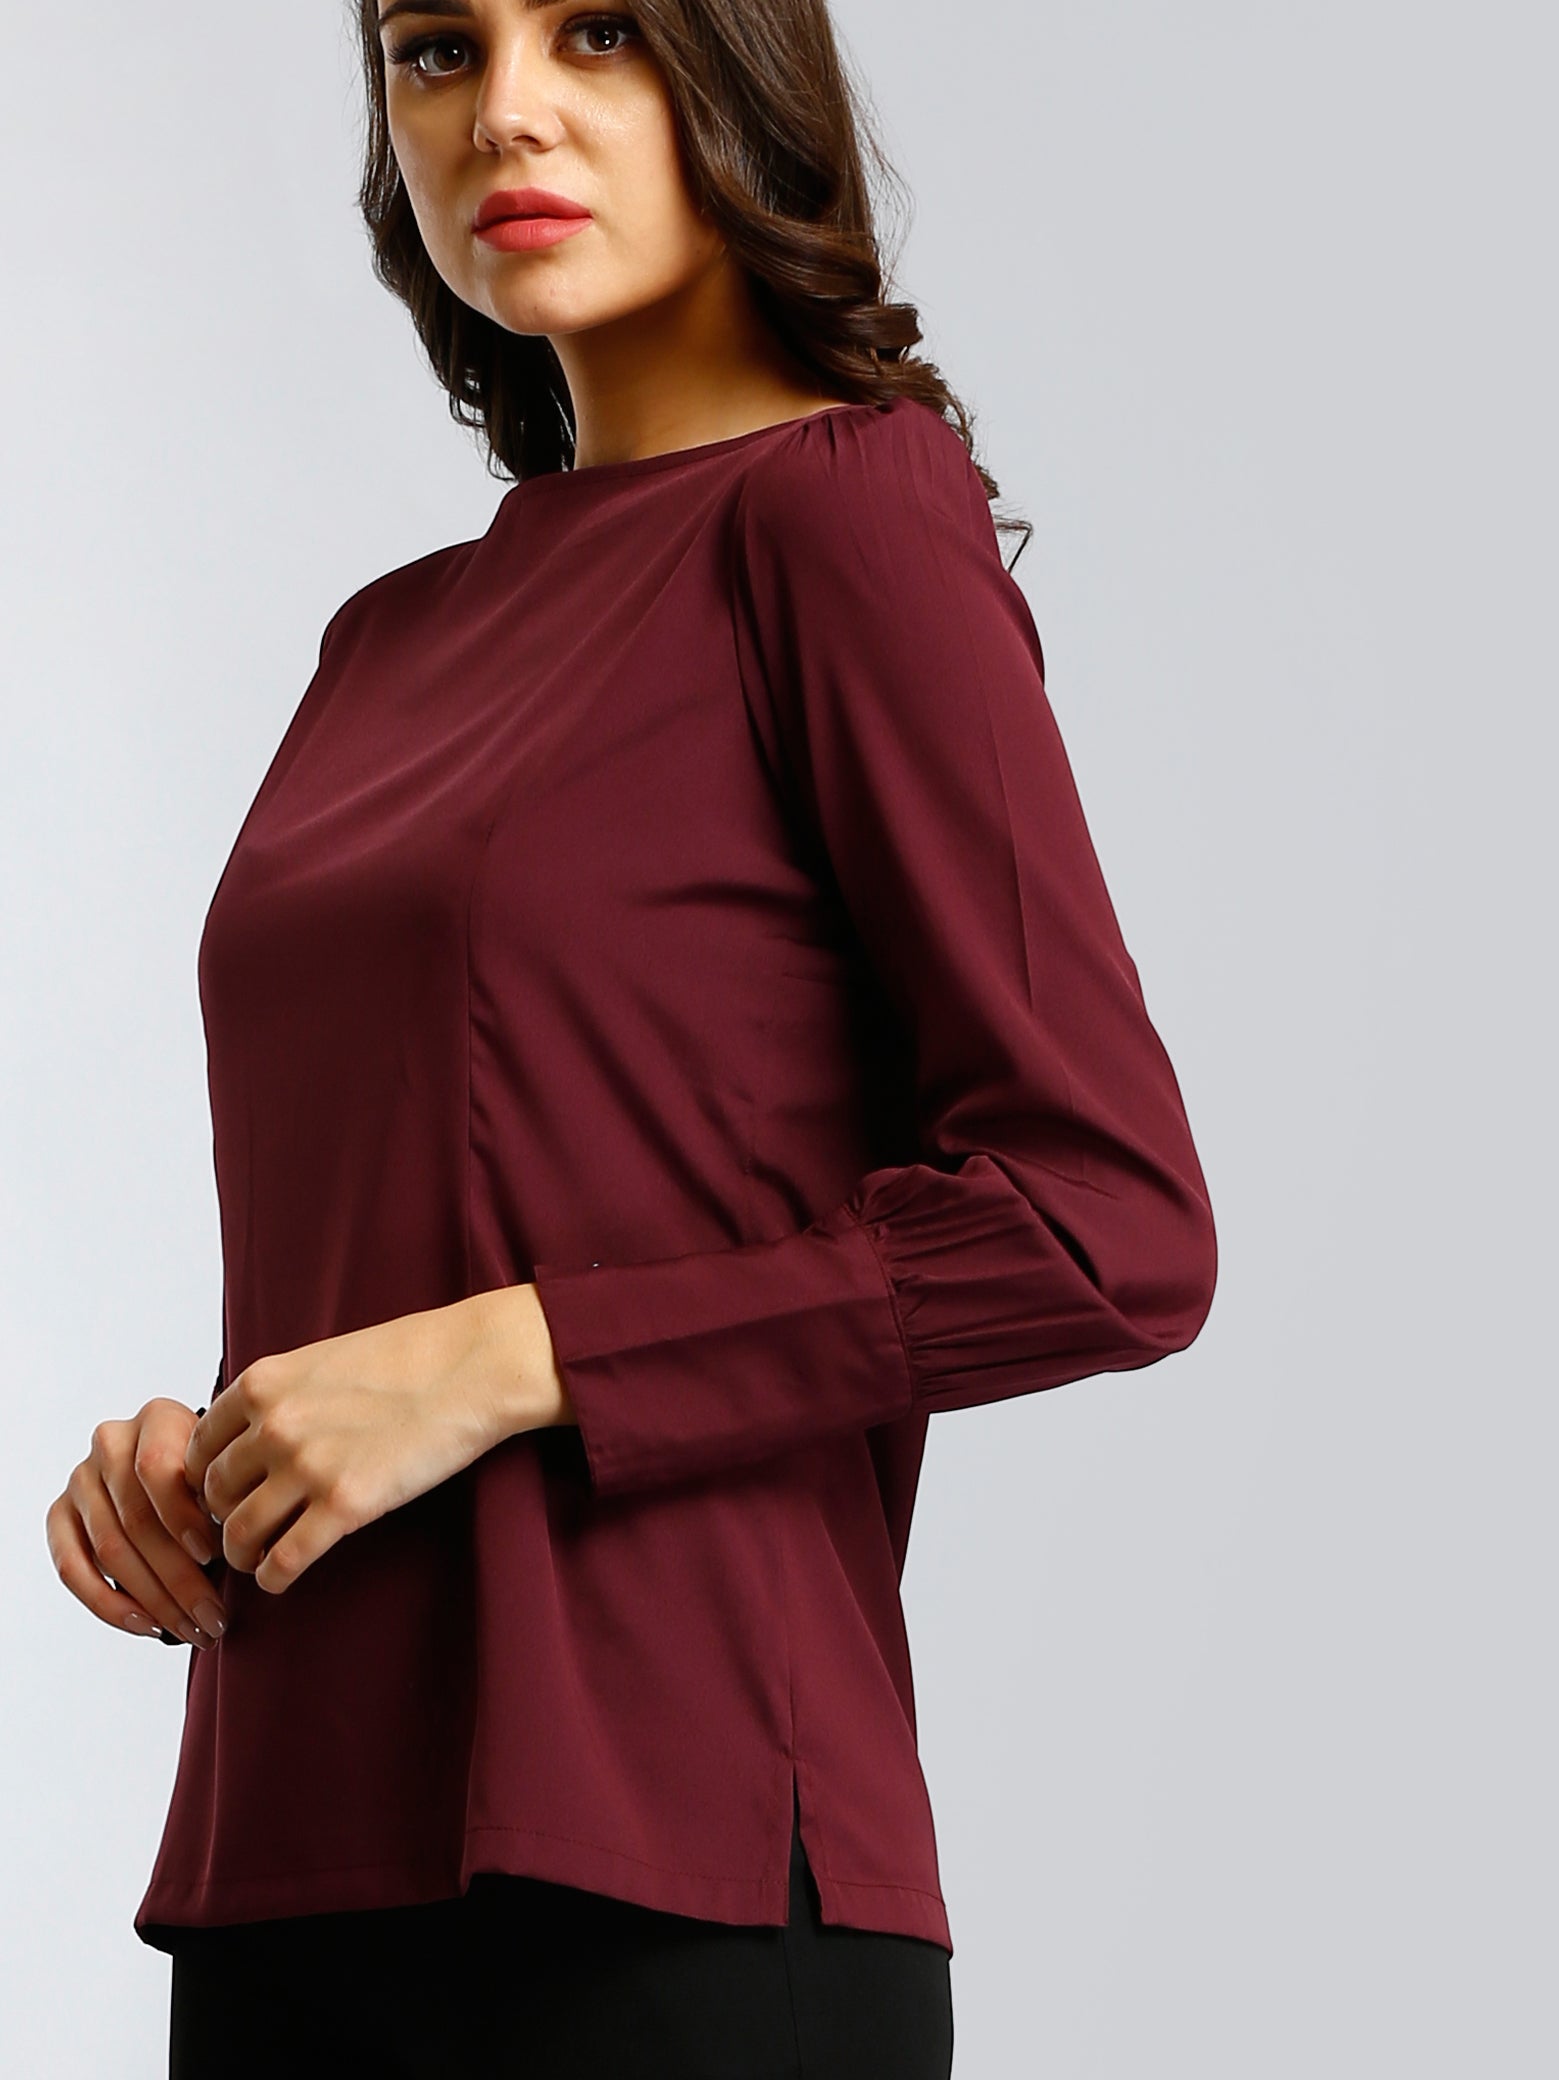 Boat Neck Top With Gather Details - Maroon